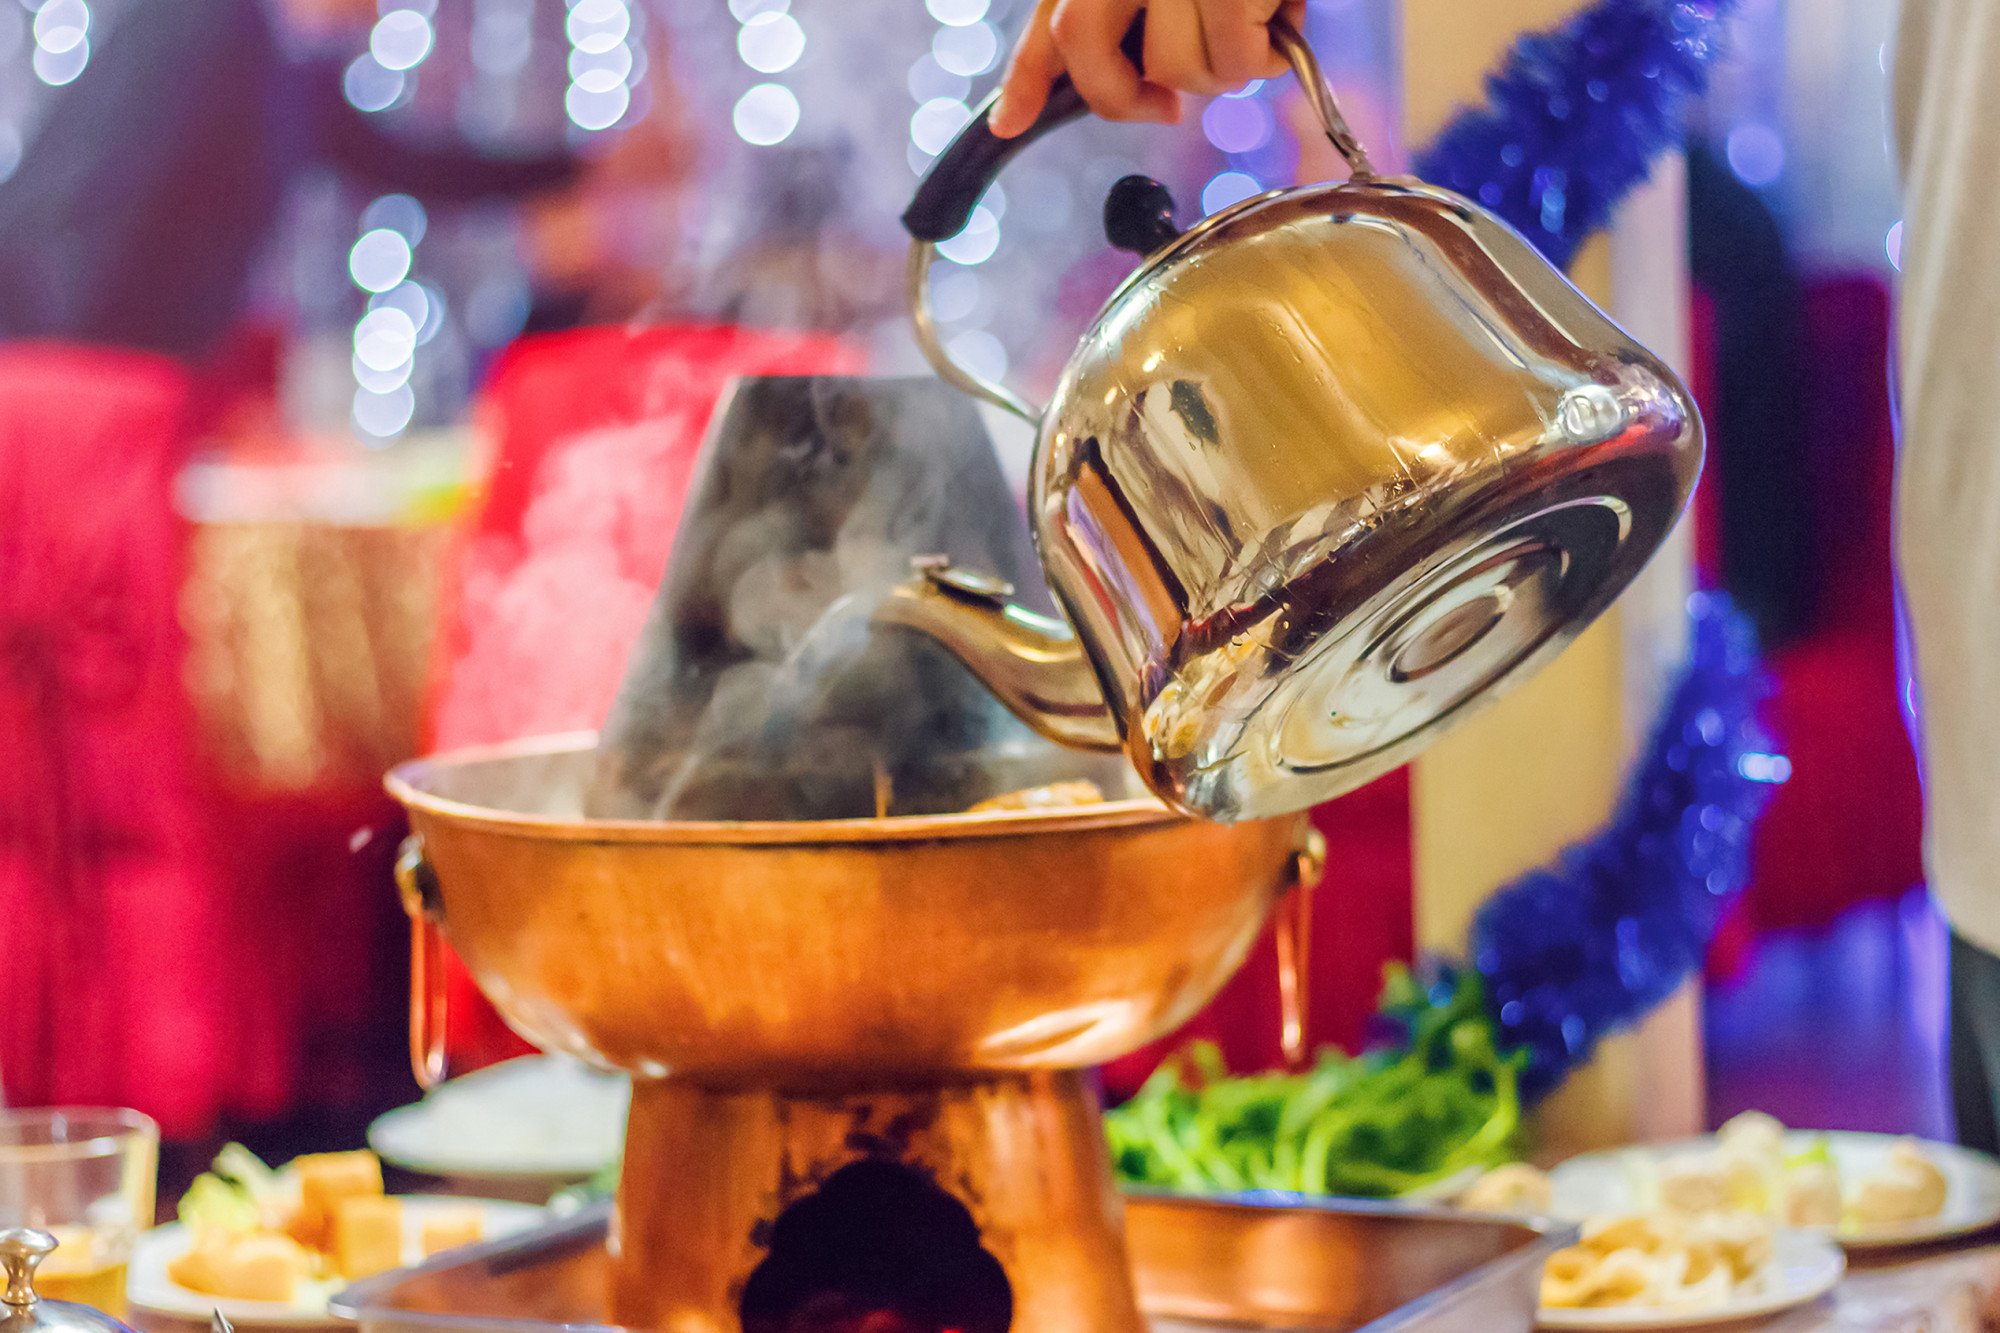 Hot pot etiquette: How to eat like a pro